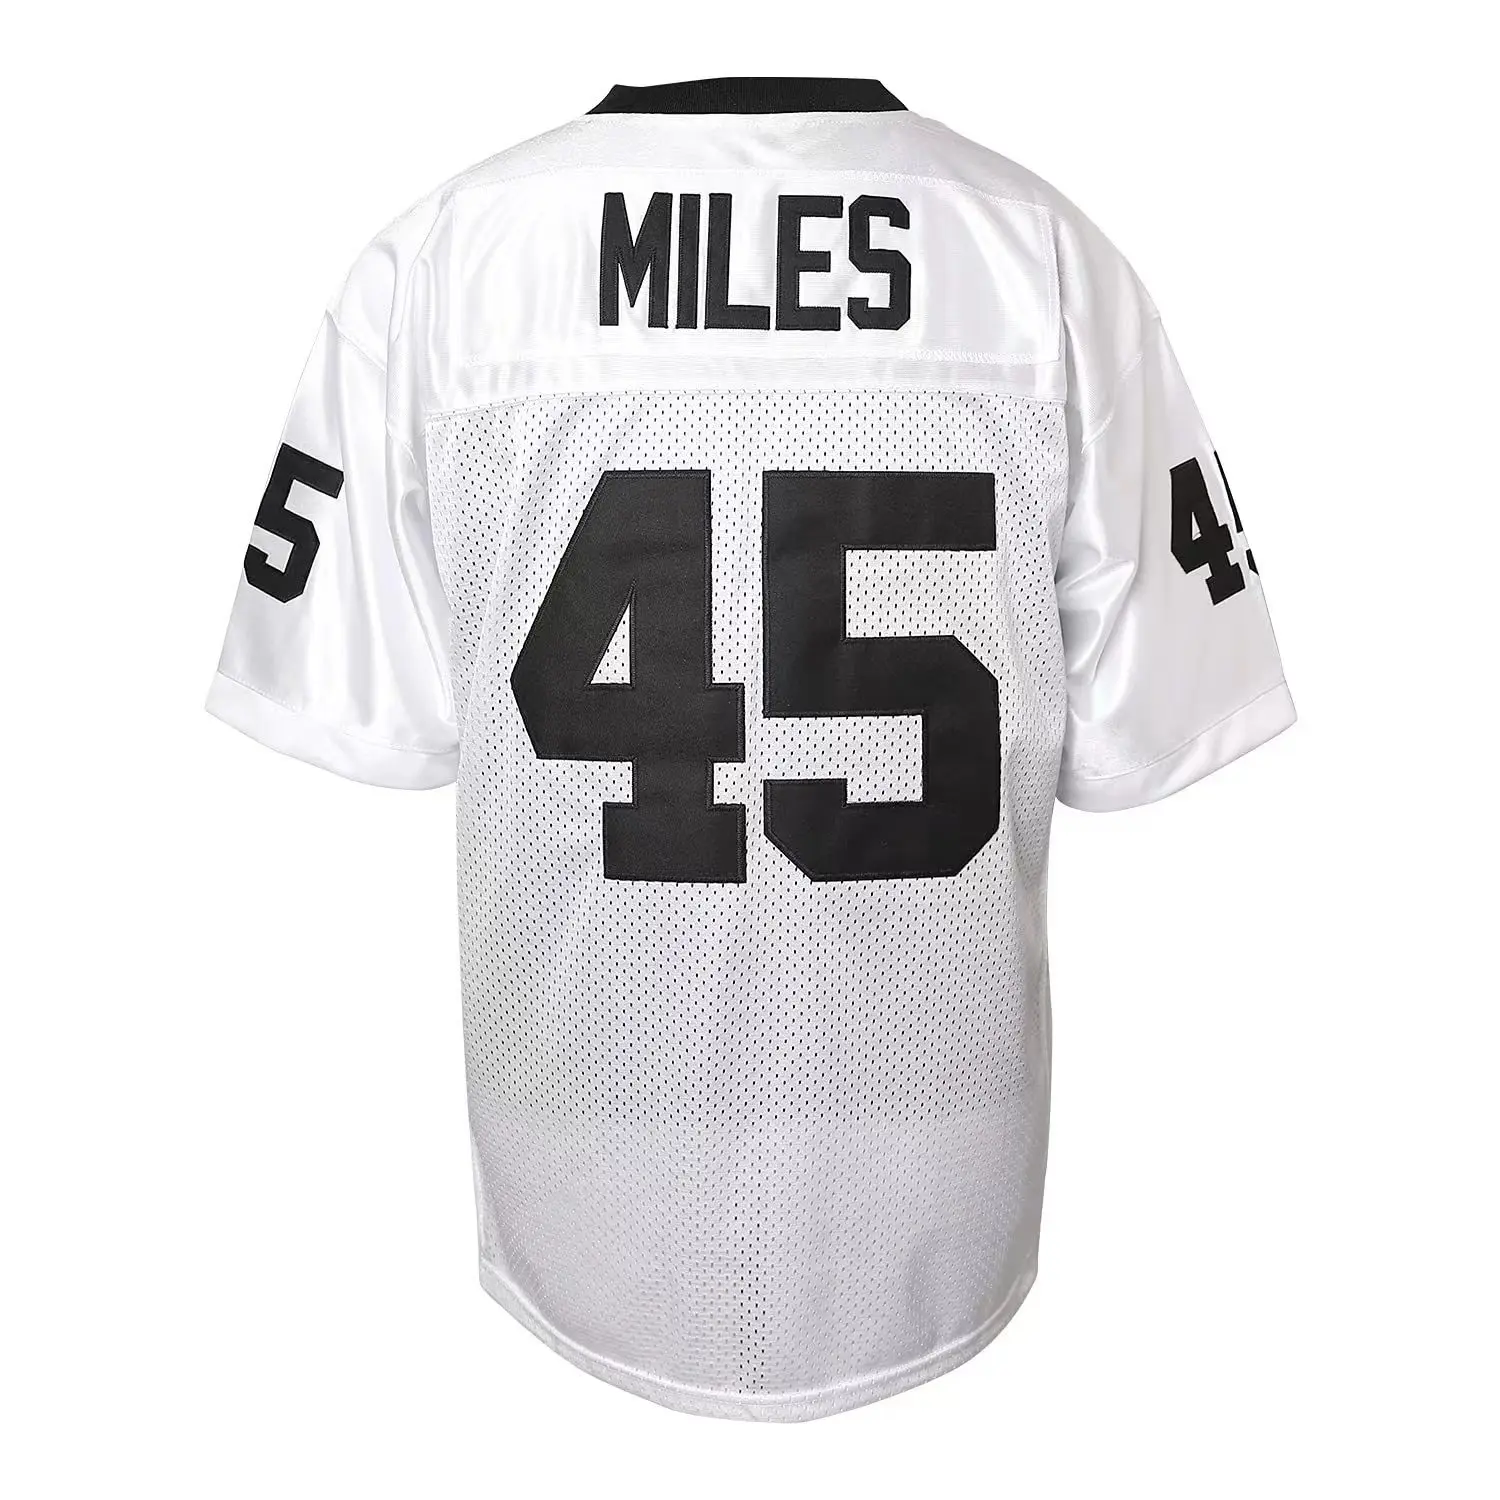 

Boobie Miles #45 Permian American football Sport jersey Shirt Embroidery sewing Outdoor sportswear loose clothes High Quality